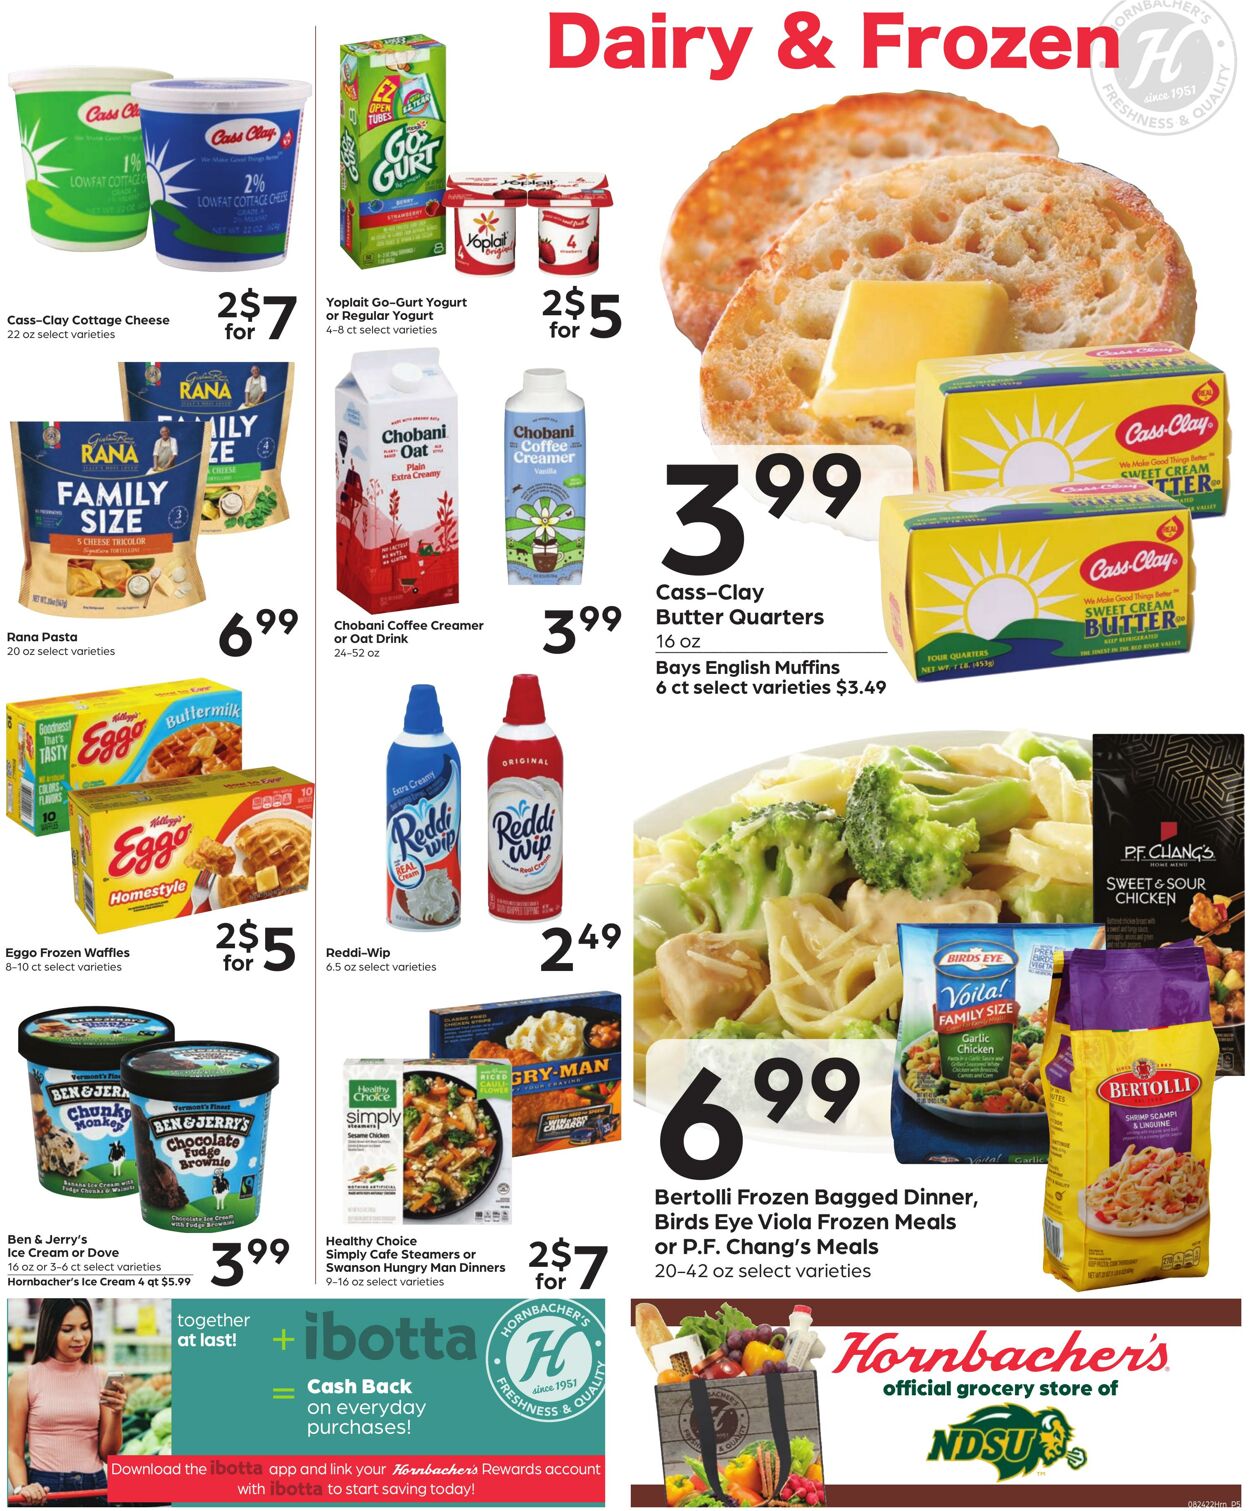 Weekly ad Hornbacher's 08/24/2022 - 08/30/2022